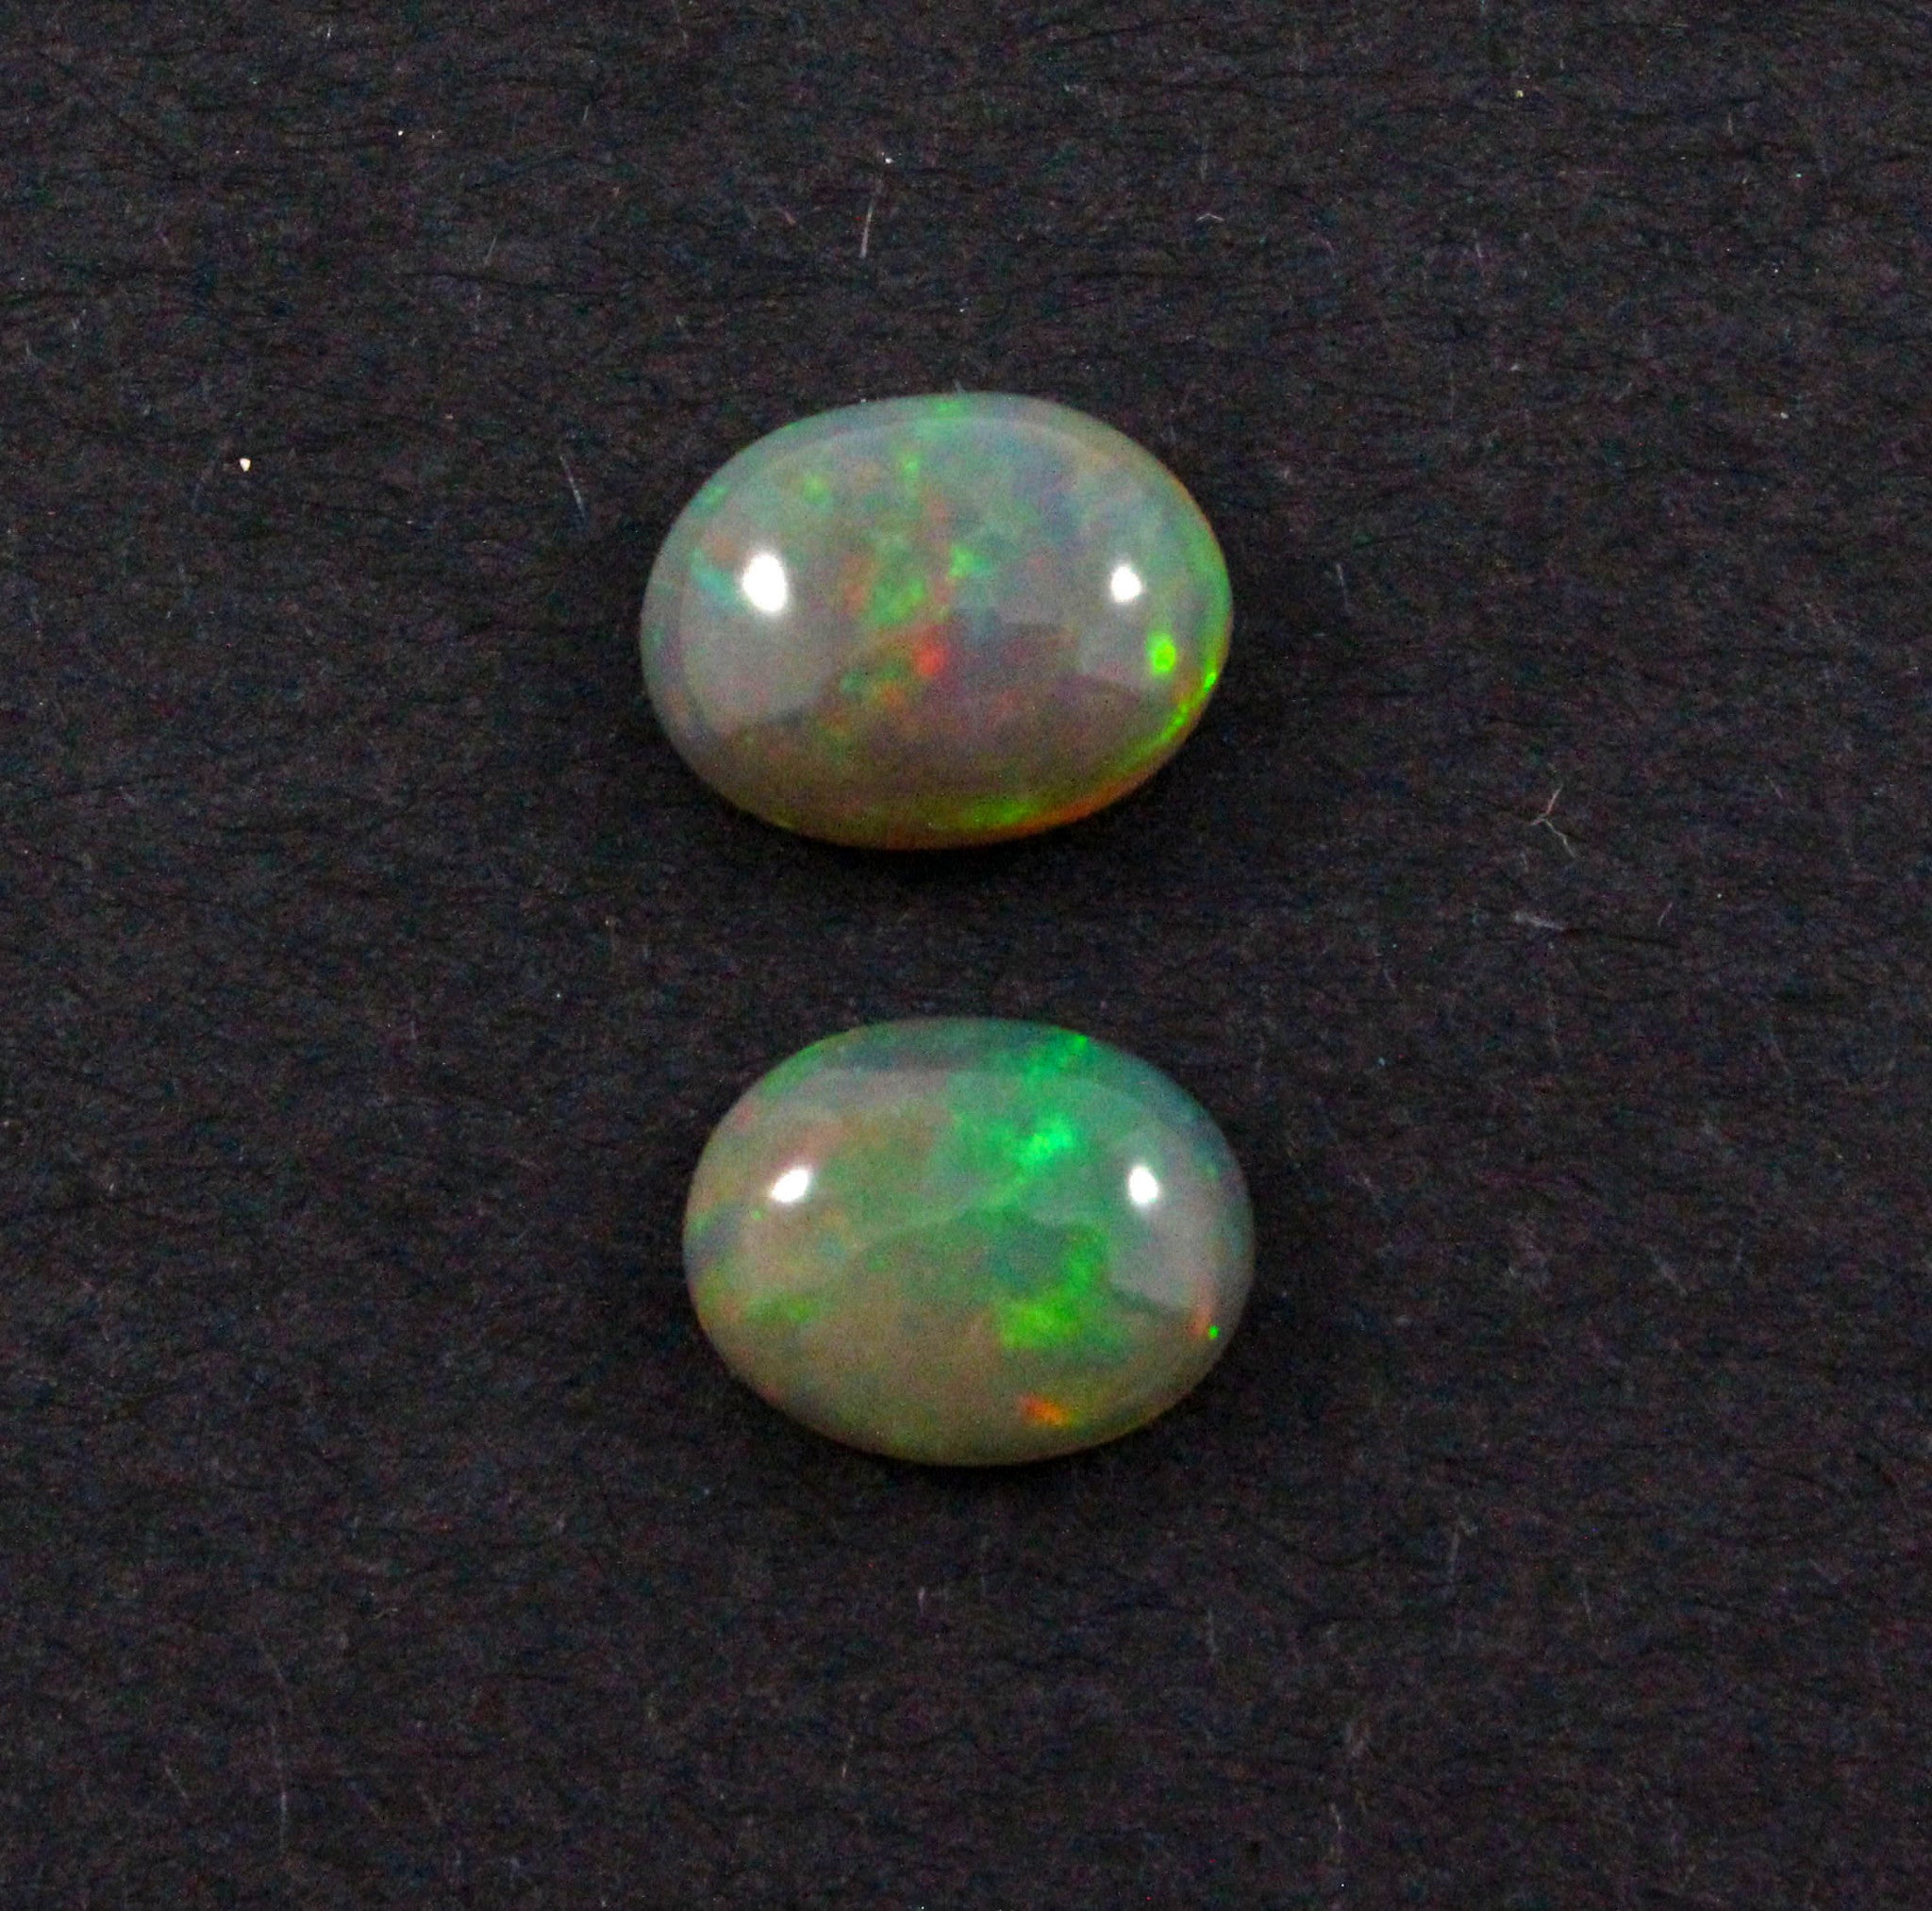 Australian jelly opal matched pair 3.16 carat total loose gemstone - Purchase only with custom order - Sarah Hughes - 6